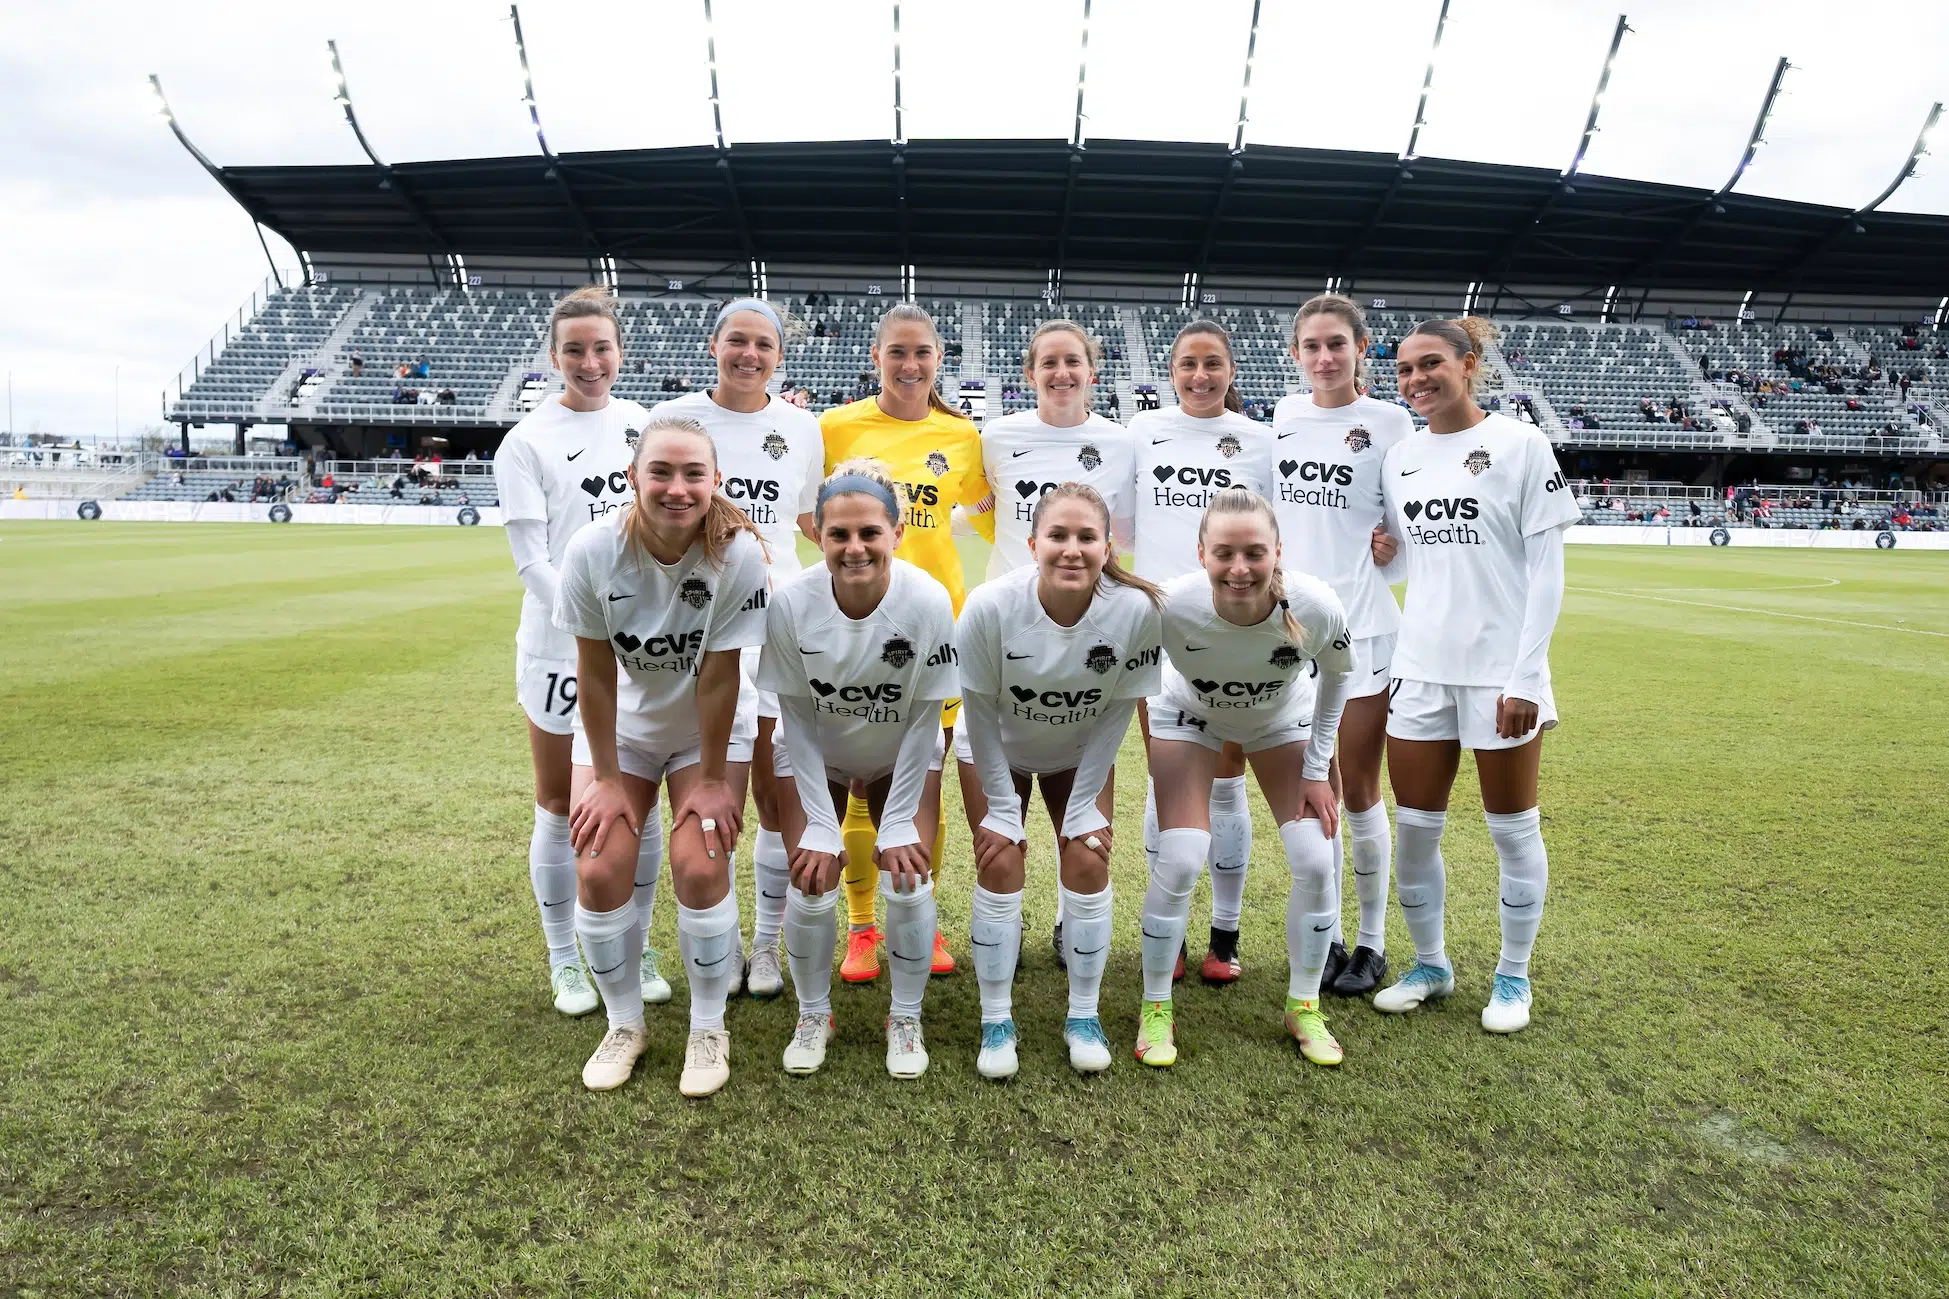 Ten players in all-white uniforms and one in a yellow goalie uniform pose for a photo in two rows on a soccer field.